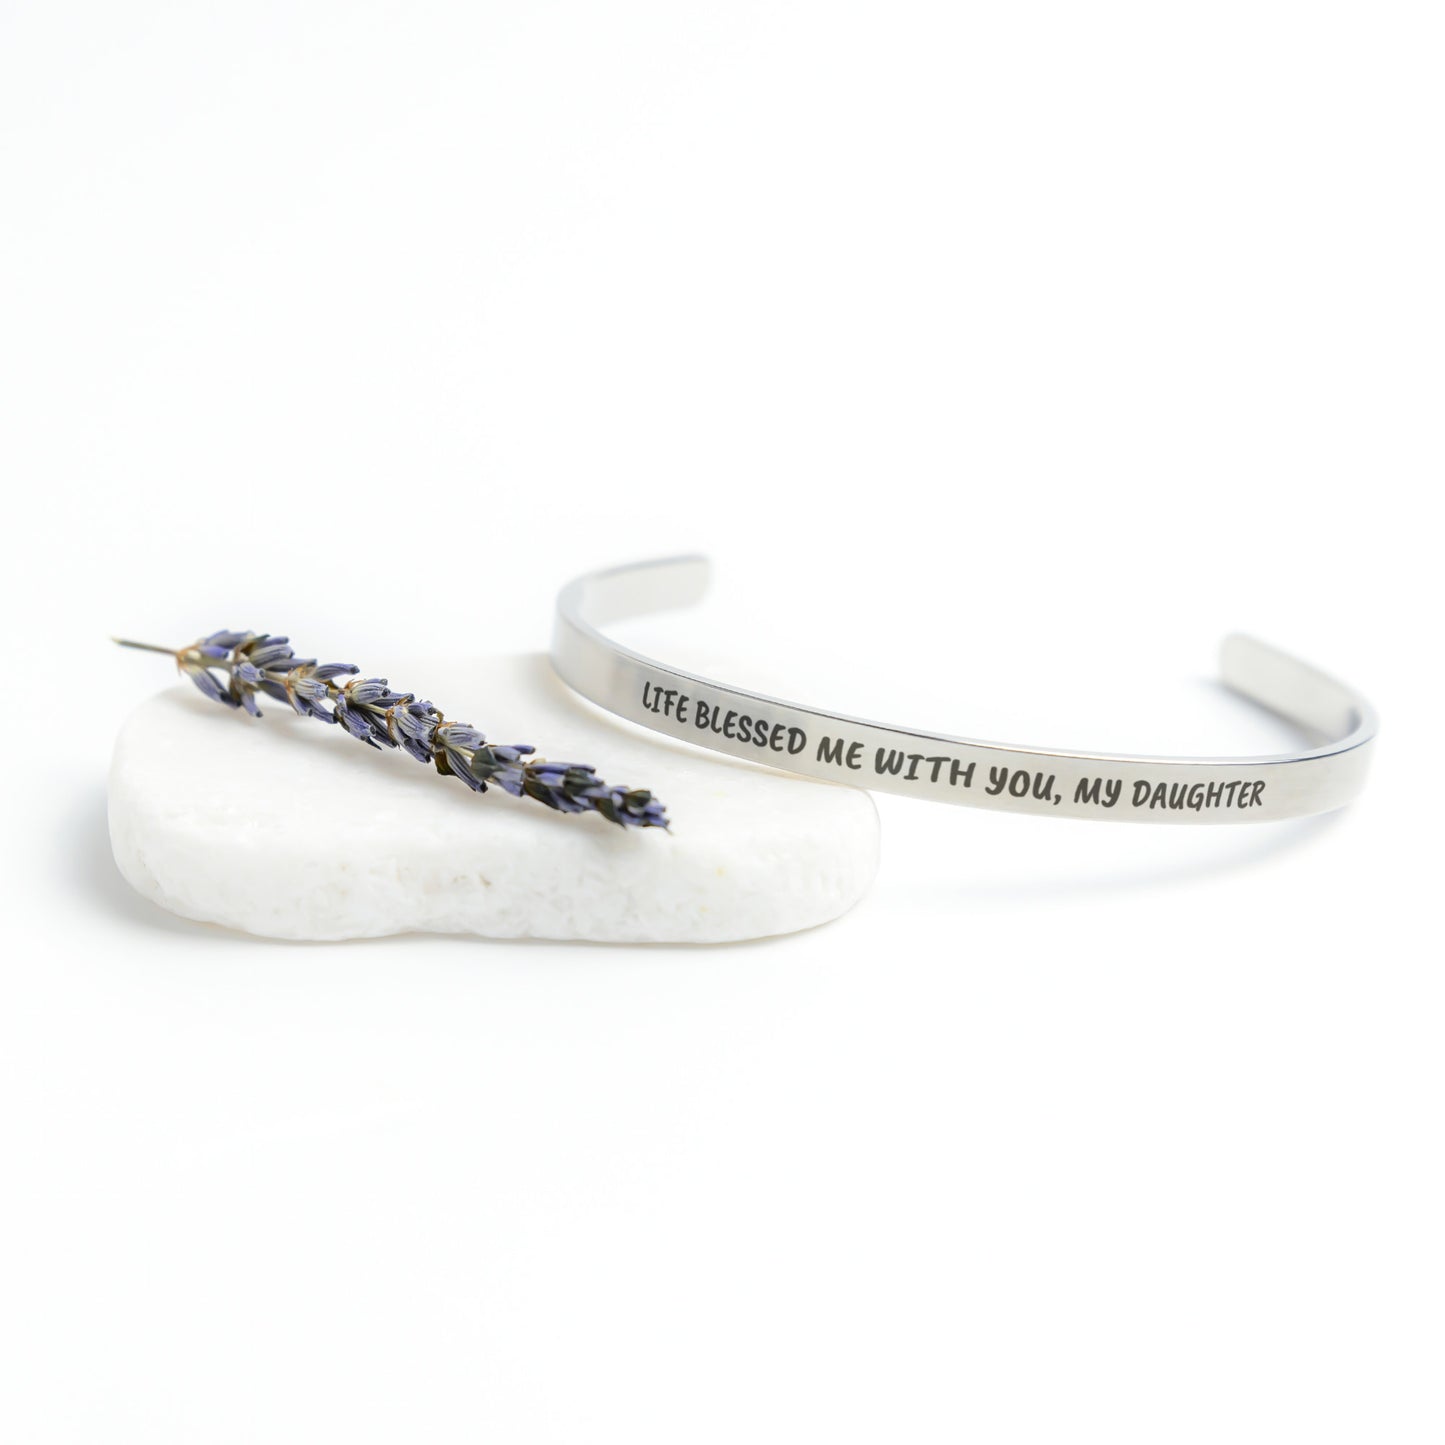 Life Blessed Me With You, My Daughter Cuff Bracelet